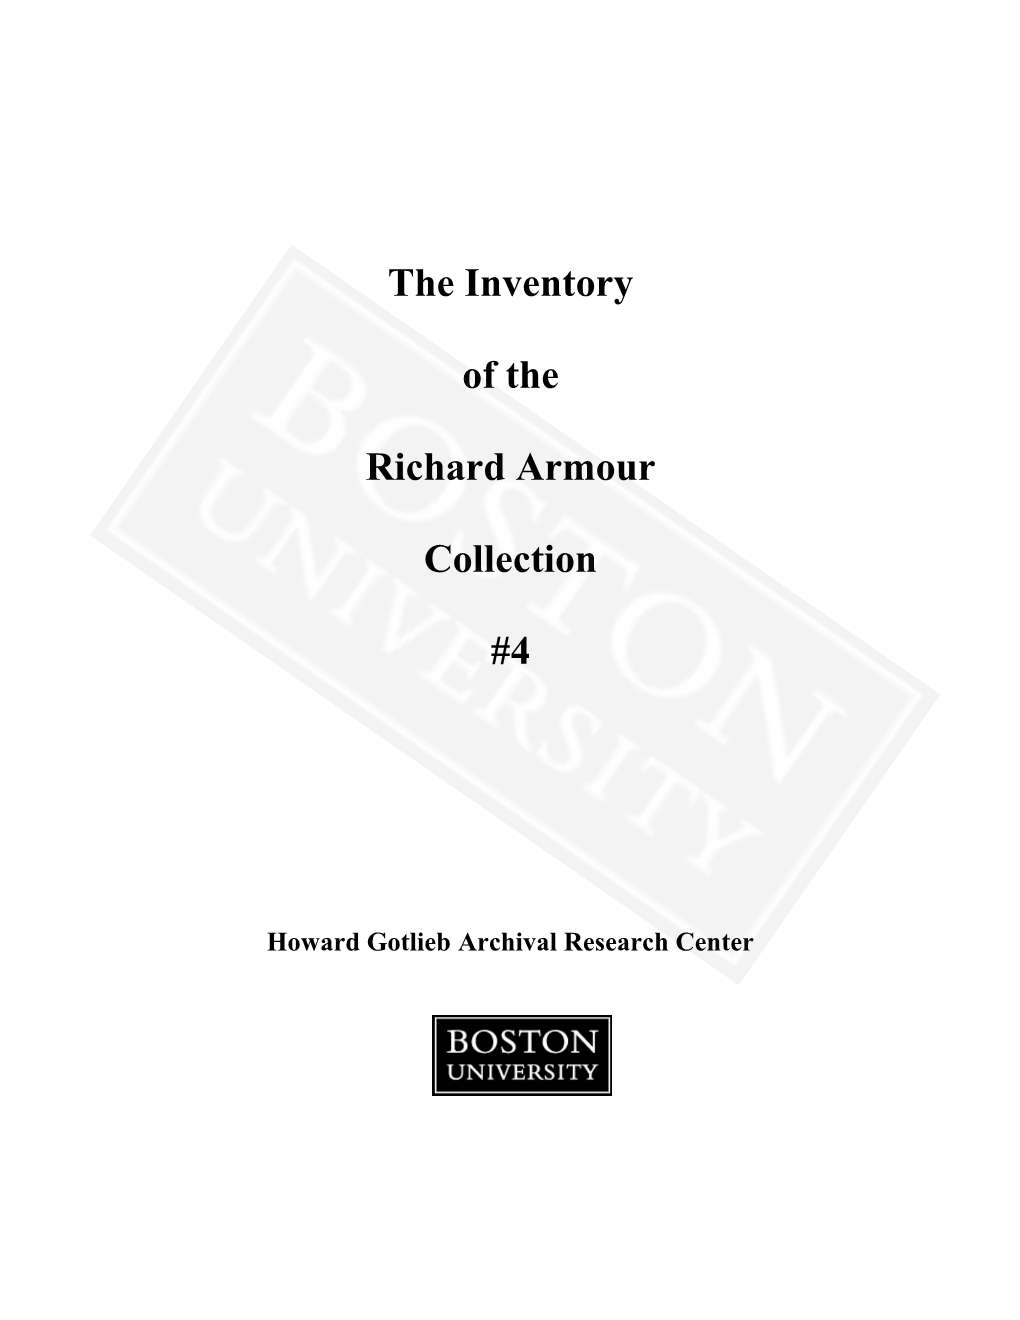 The Inventory of the Richard Armour Collection #4